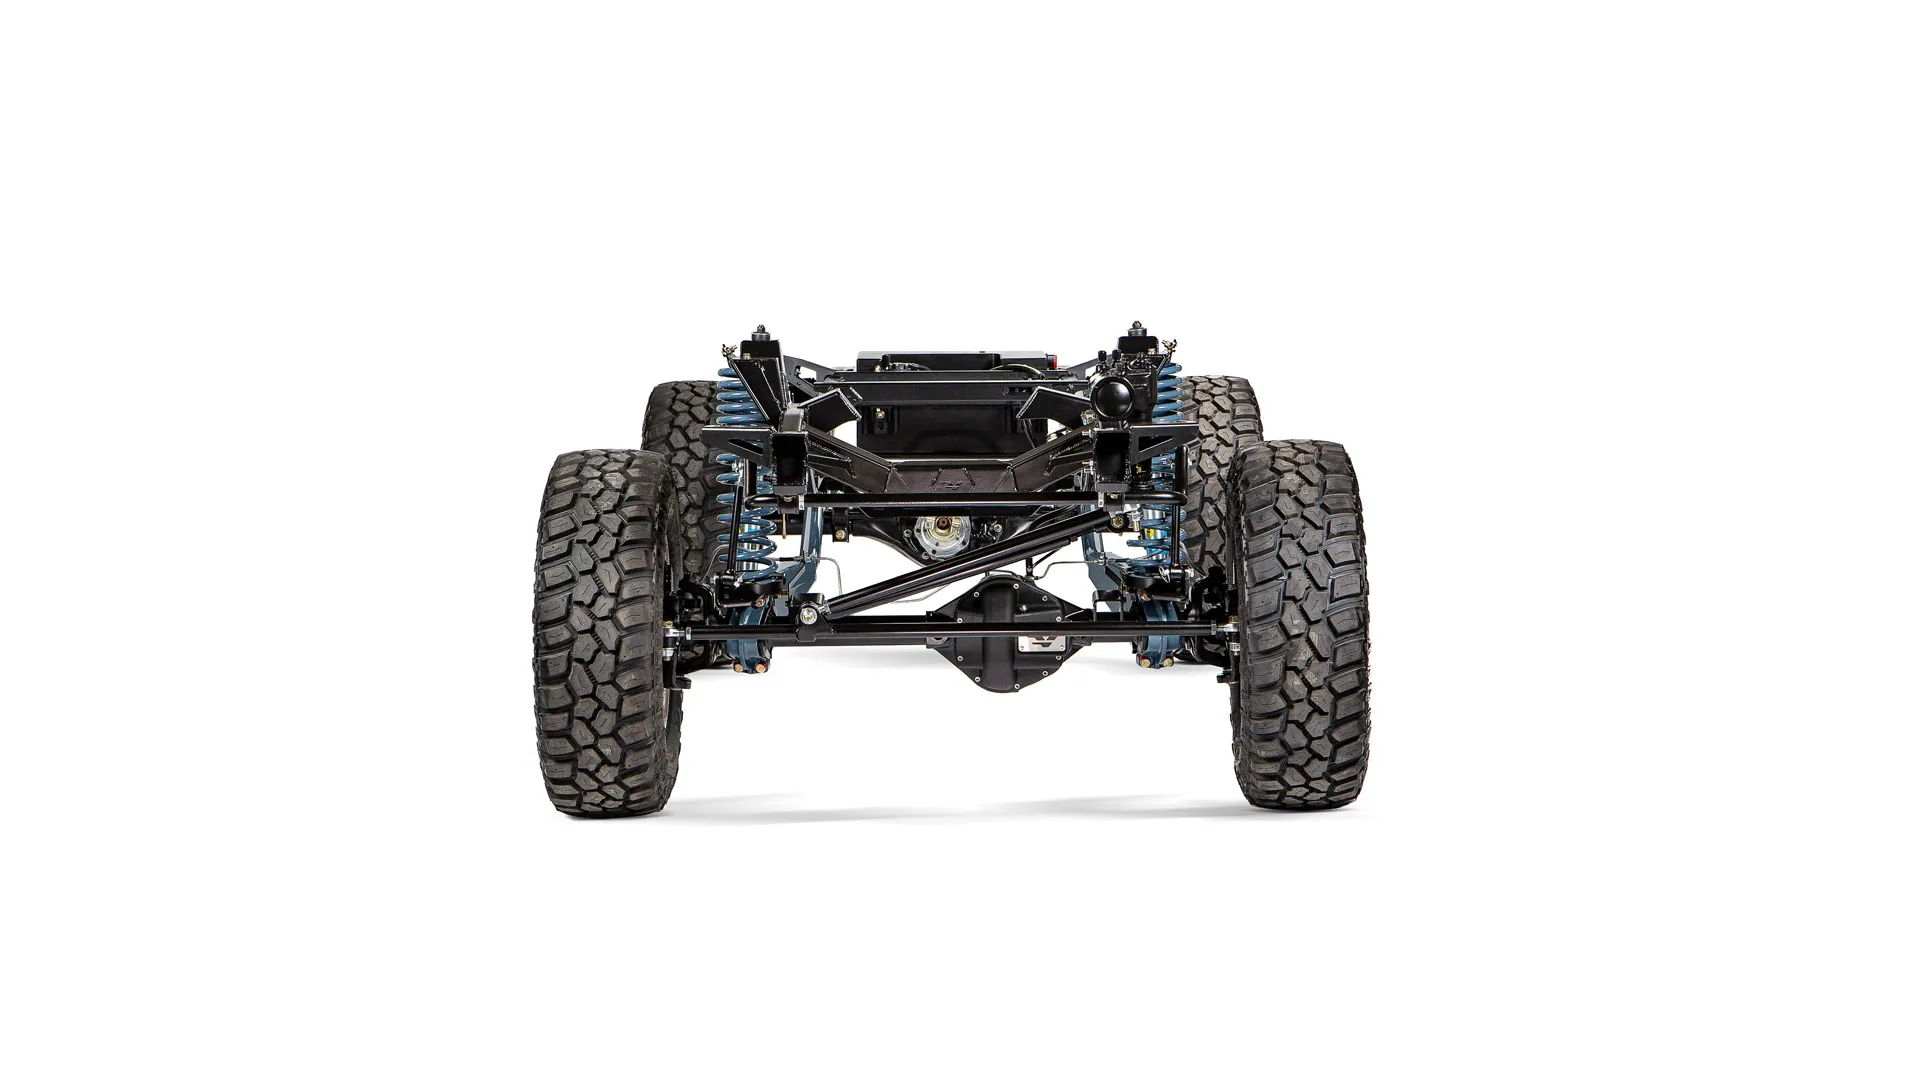 Classic Ford Bronco Velocity VB2 rolling chassis